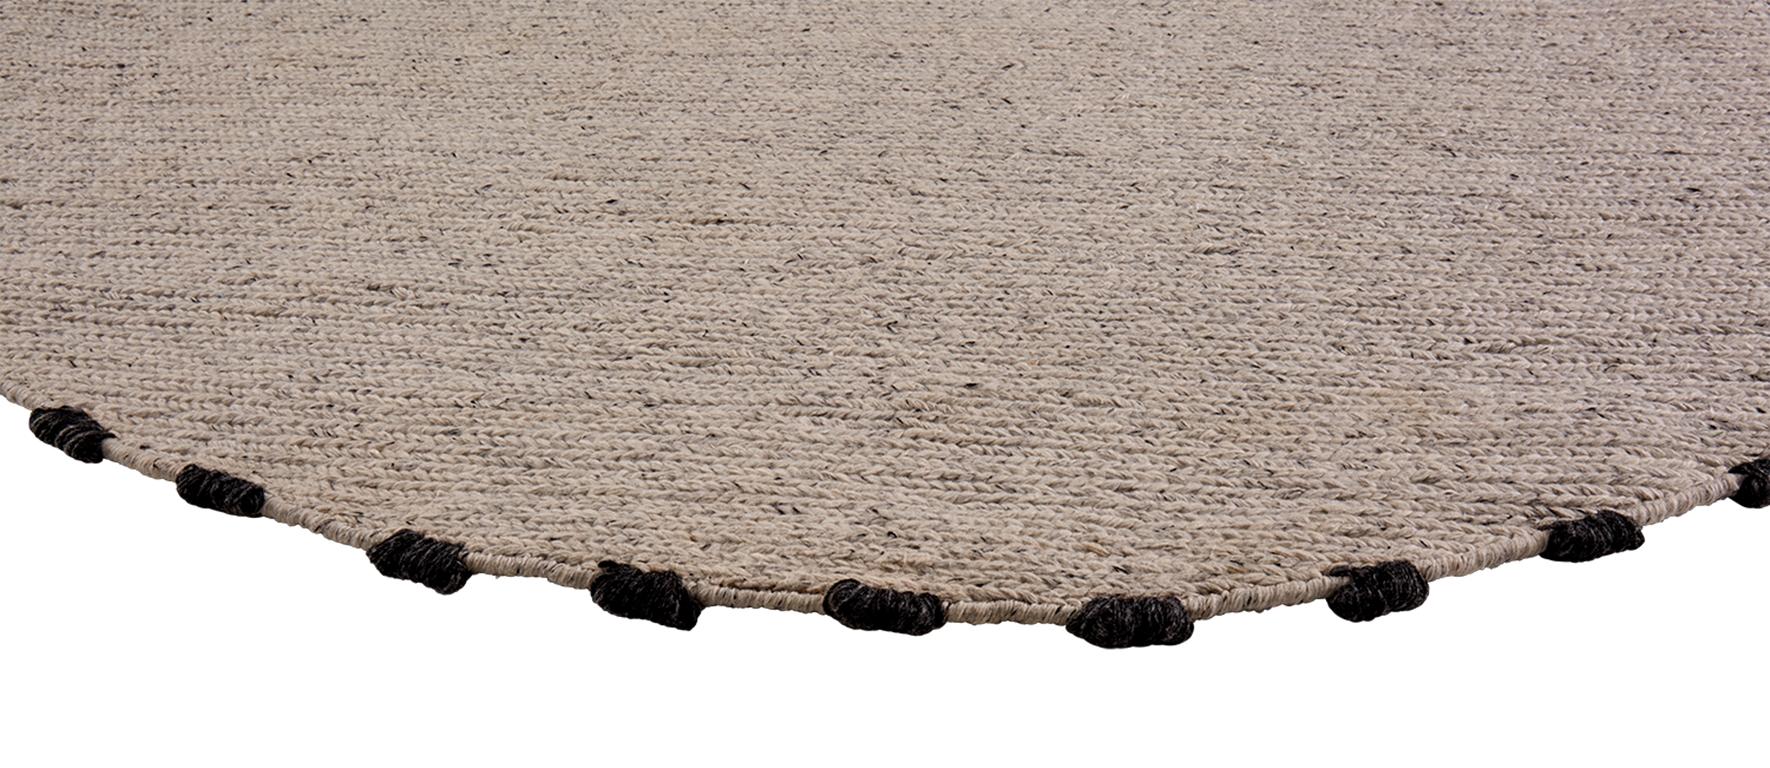 Nepalese 'Brish' Outdoor Rug hand-woven in 100% PET, ⌀ 250 cm For Sale